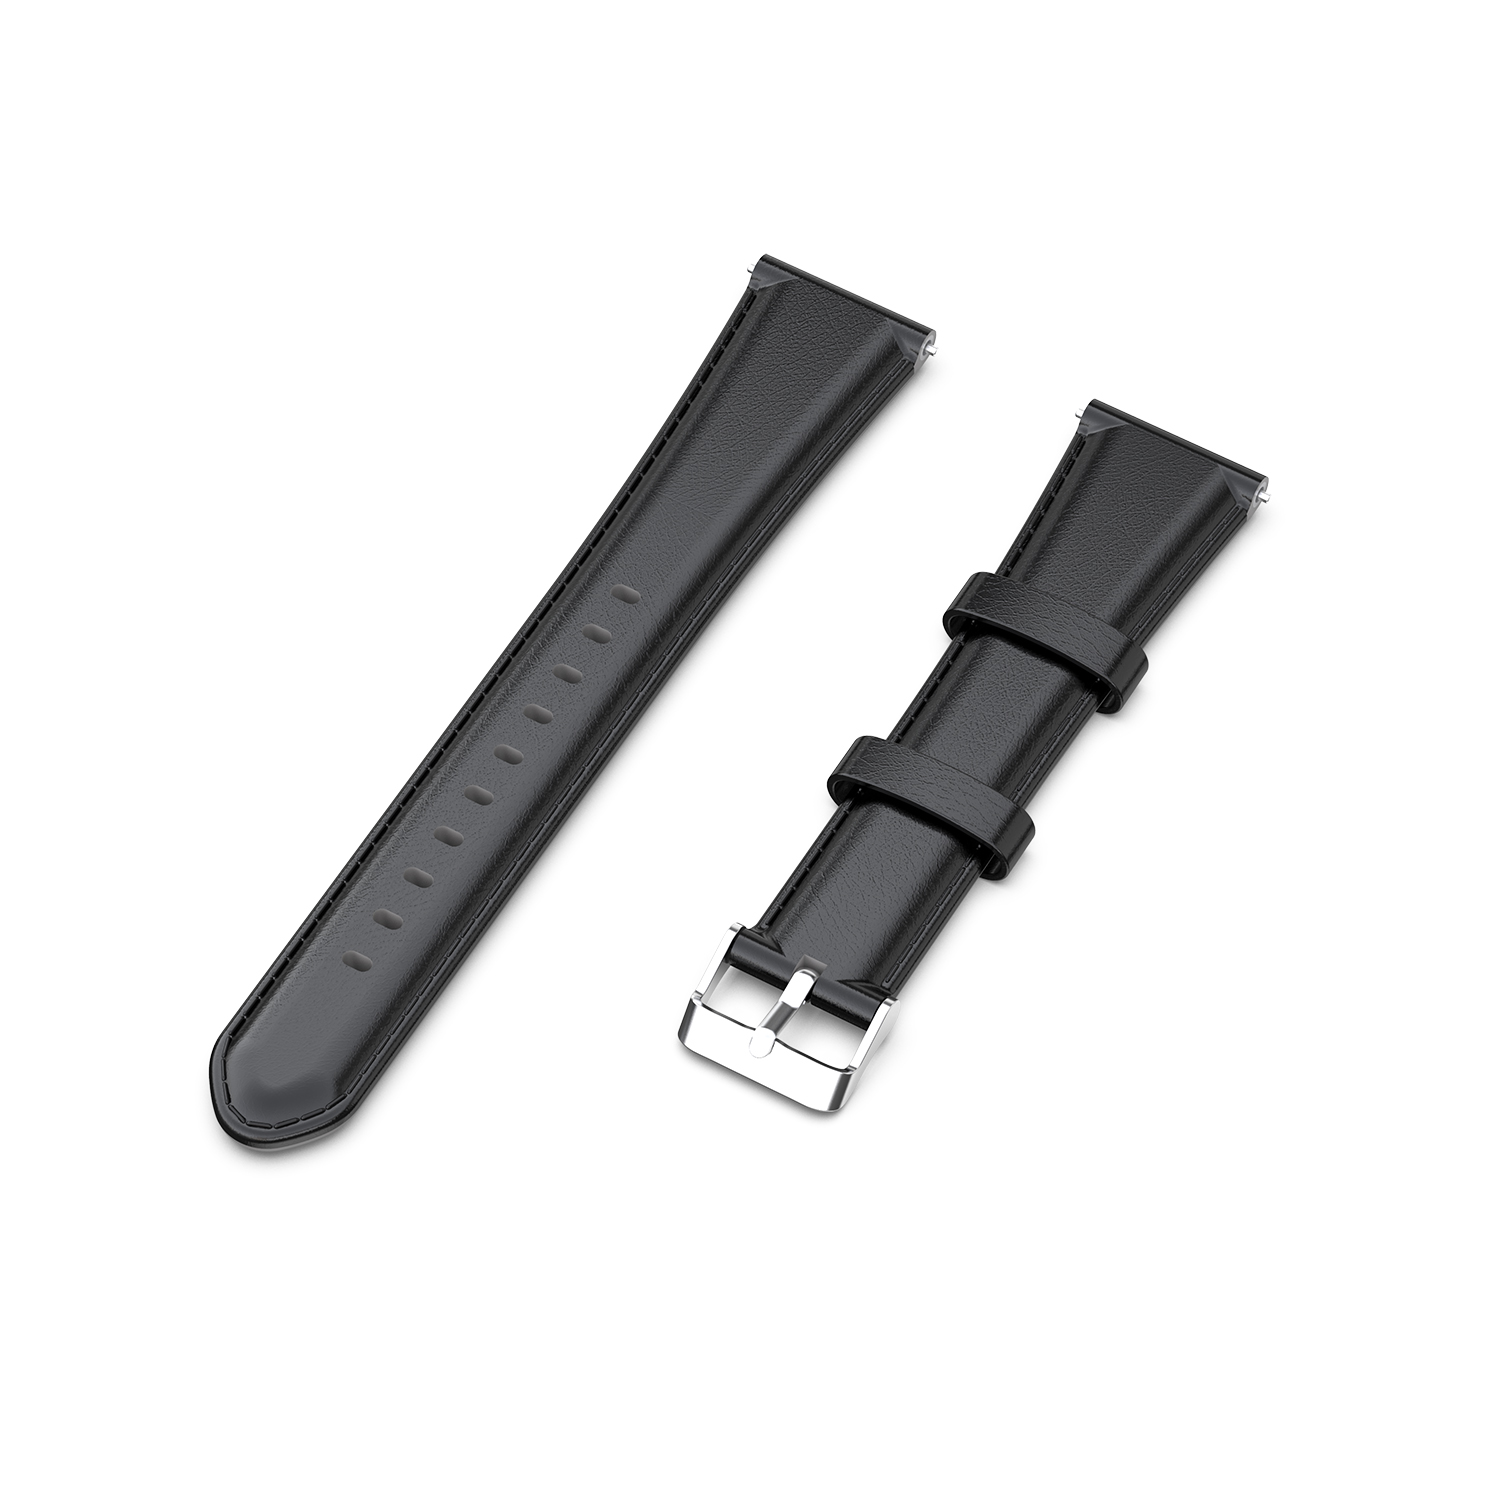 Bakeey-22mm-Genuine-Leather-Replacement-Strap-Smart-Watch-Band-For-Amazfit-GTR-47MM-1786519-16